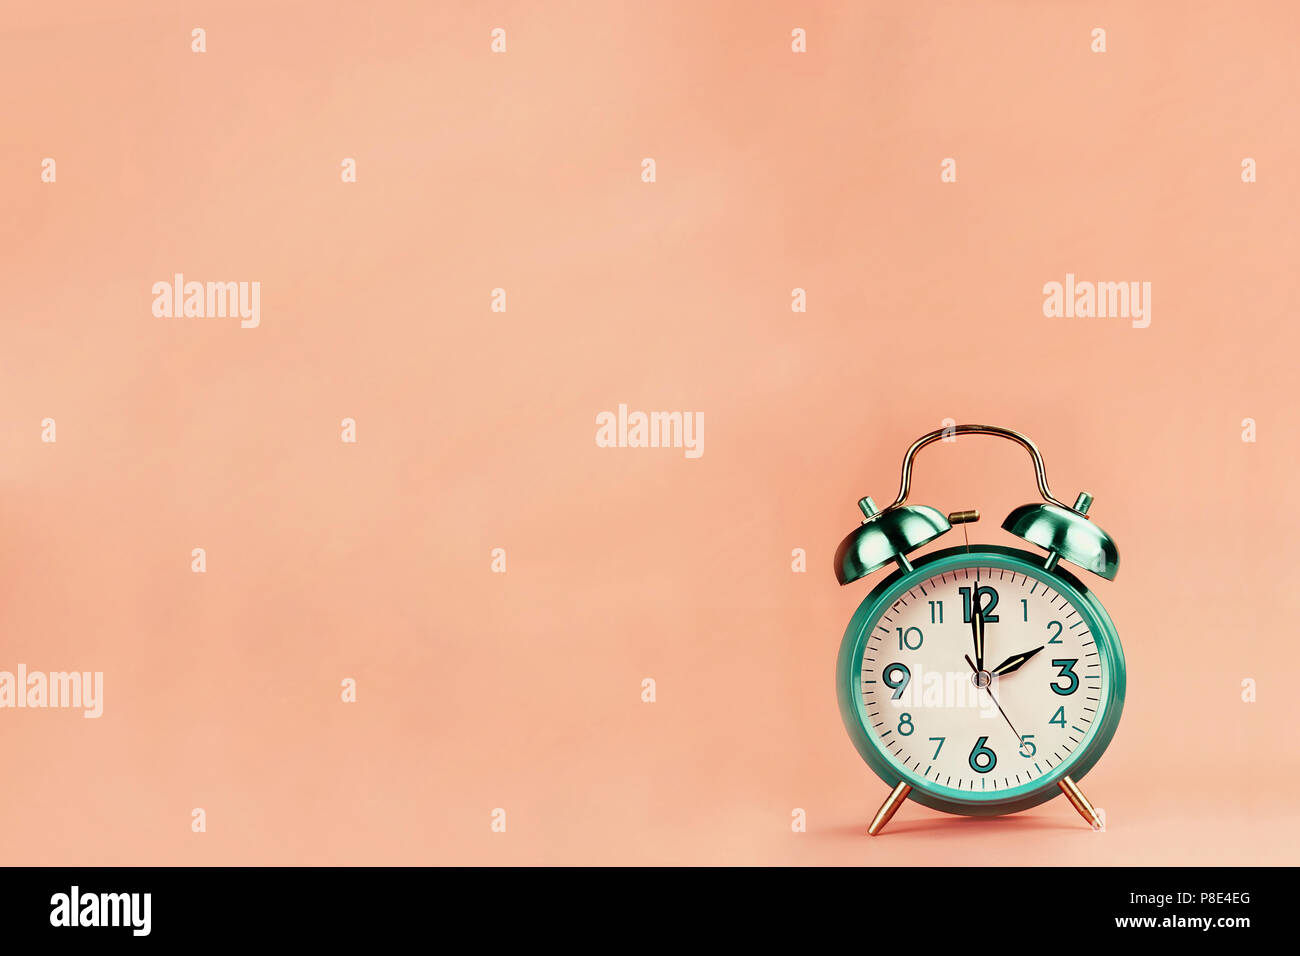 Colorful vintage style alarm clock with room for free background space for text. Stock Photo